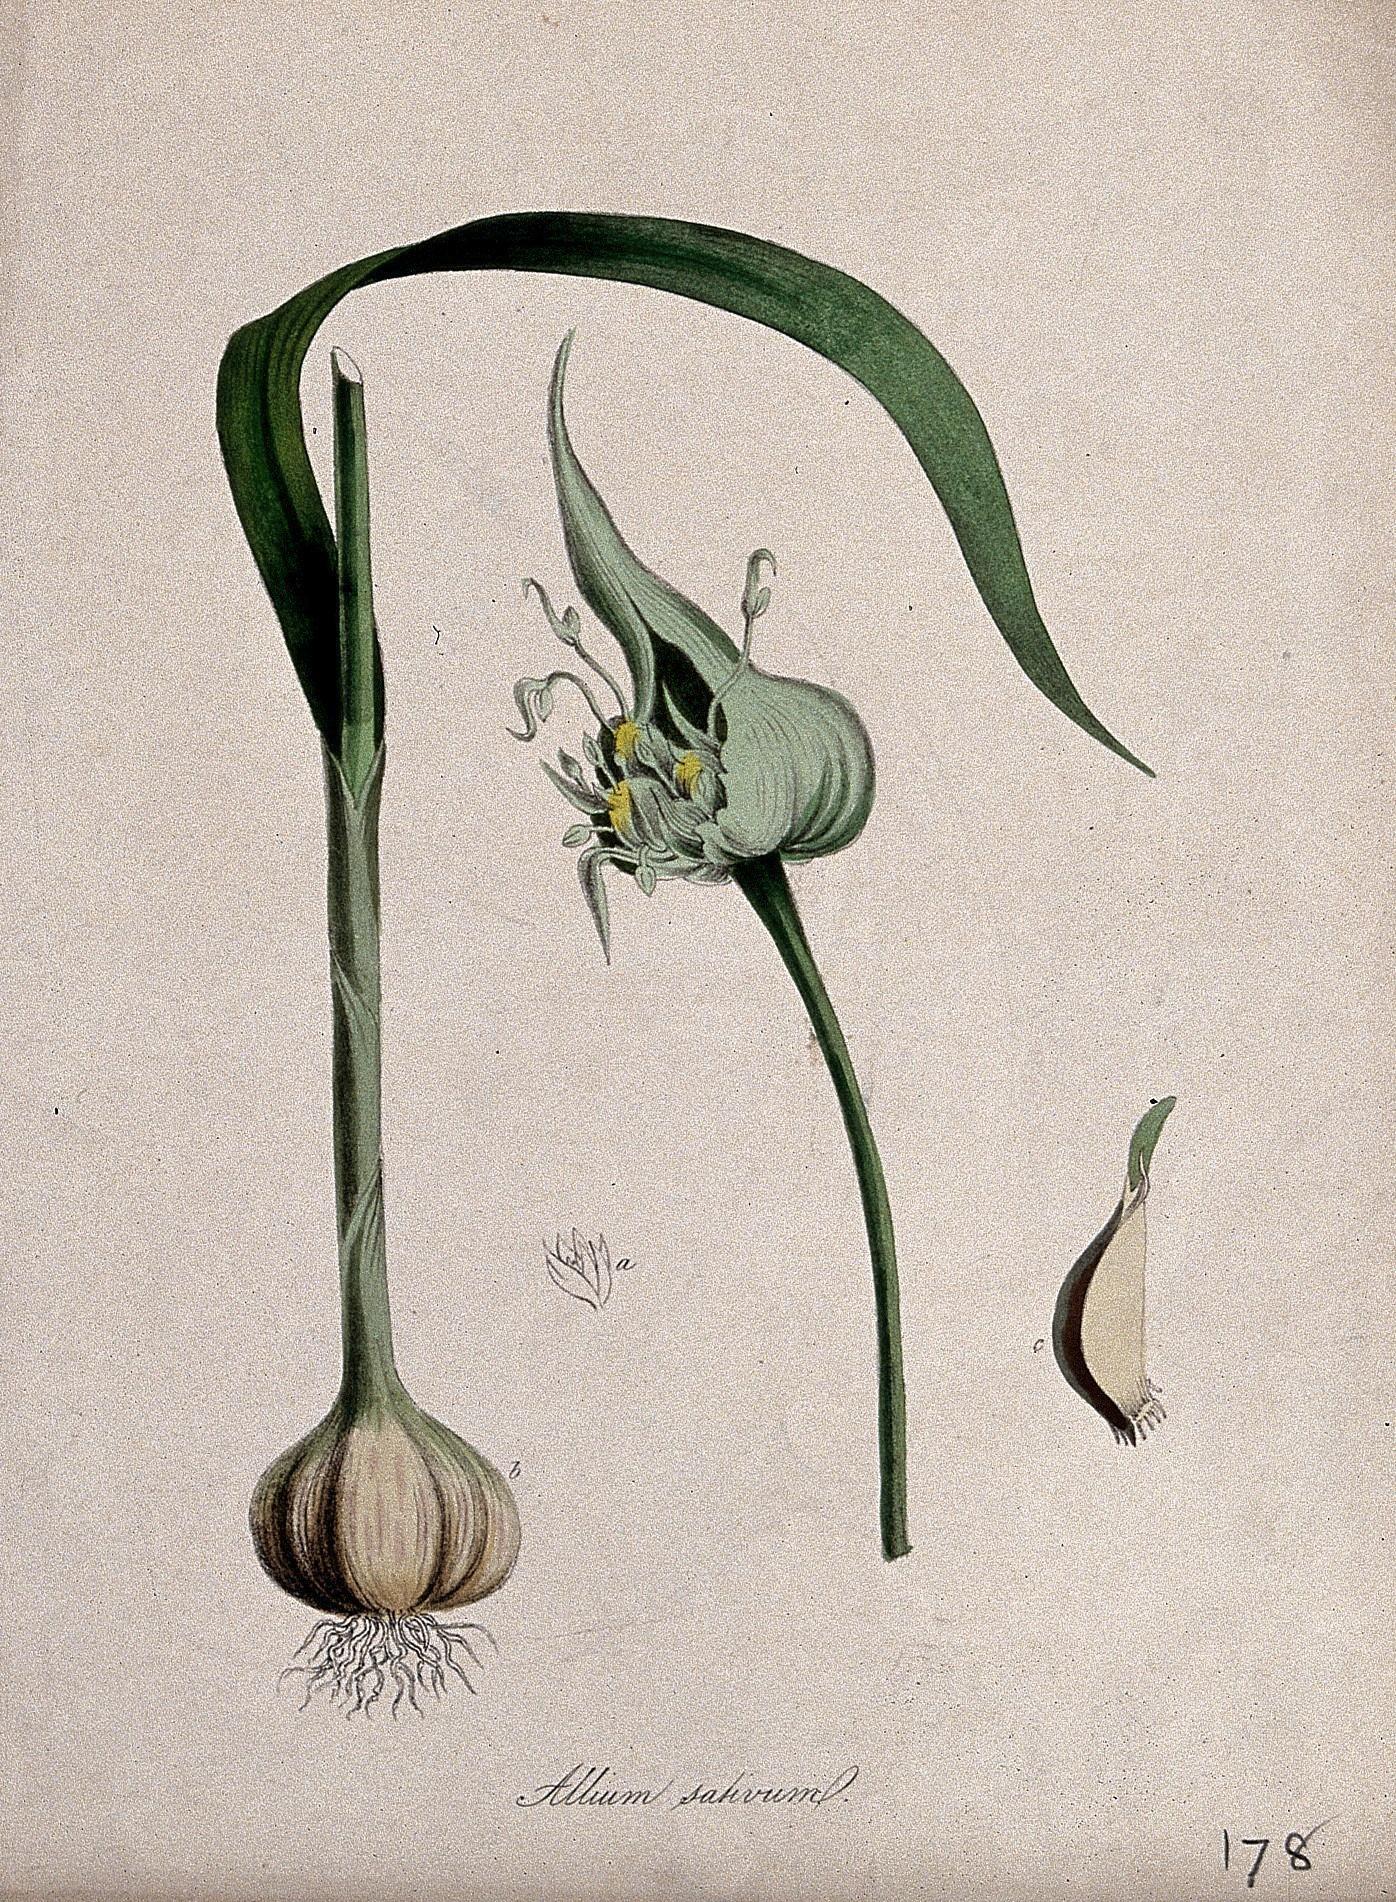 Illustration of Garlic by James Sowerby